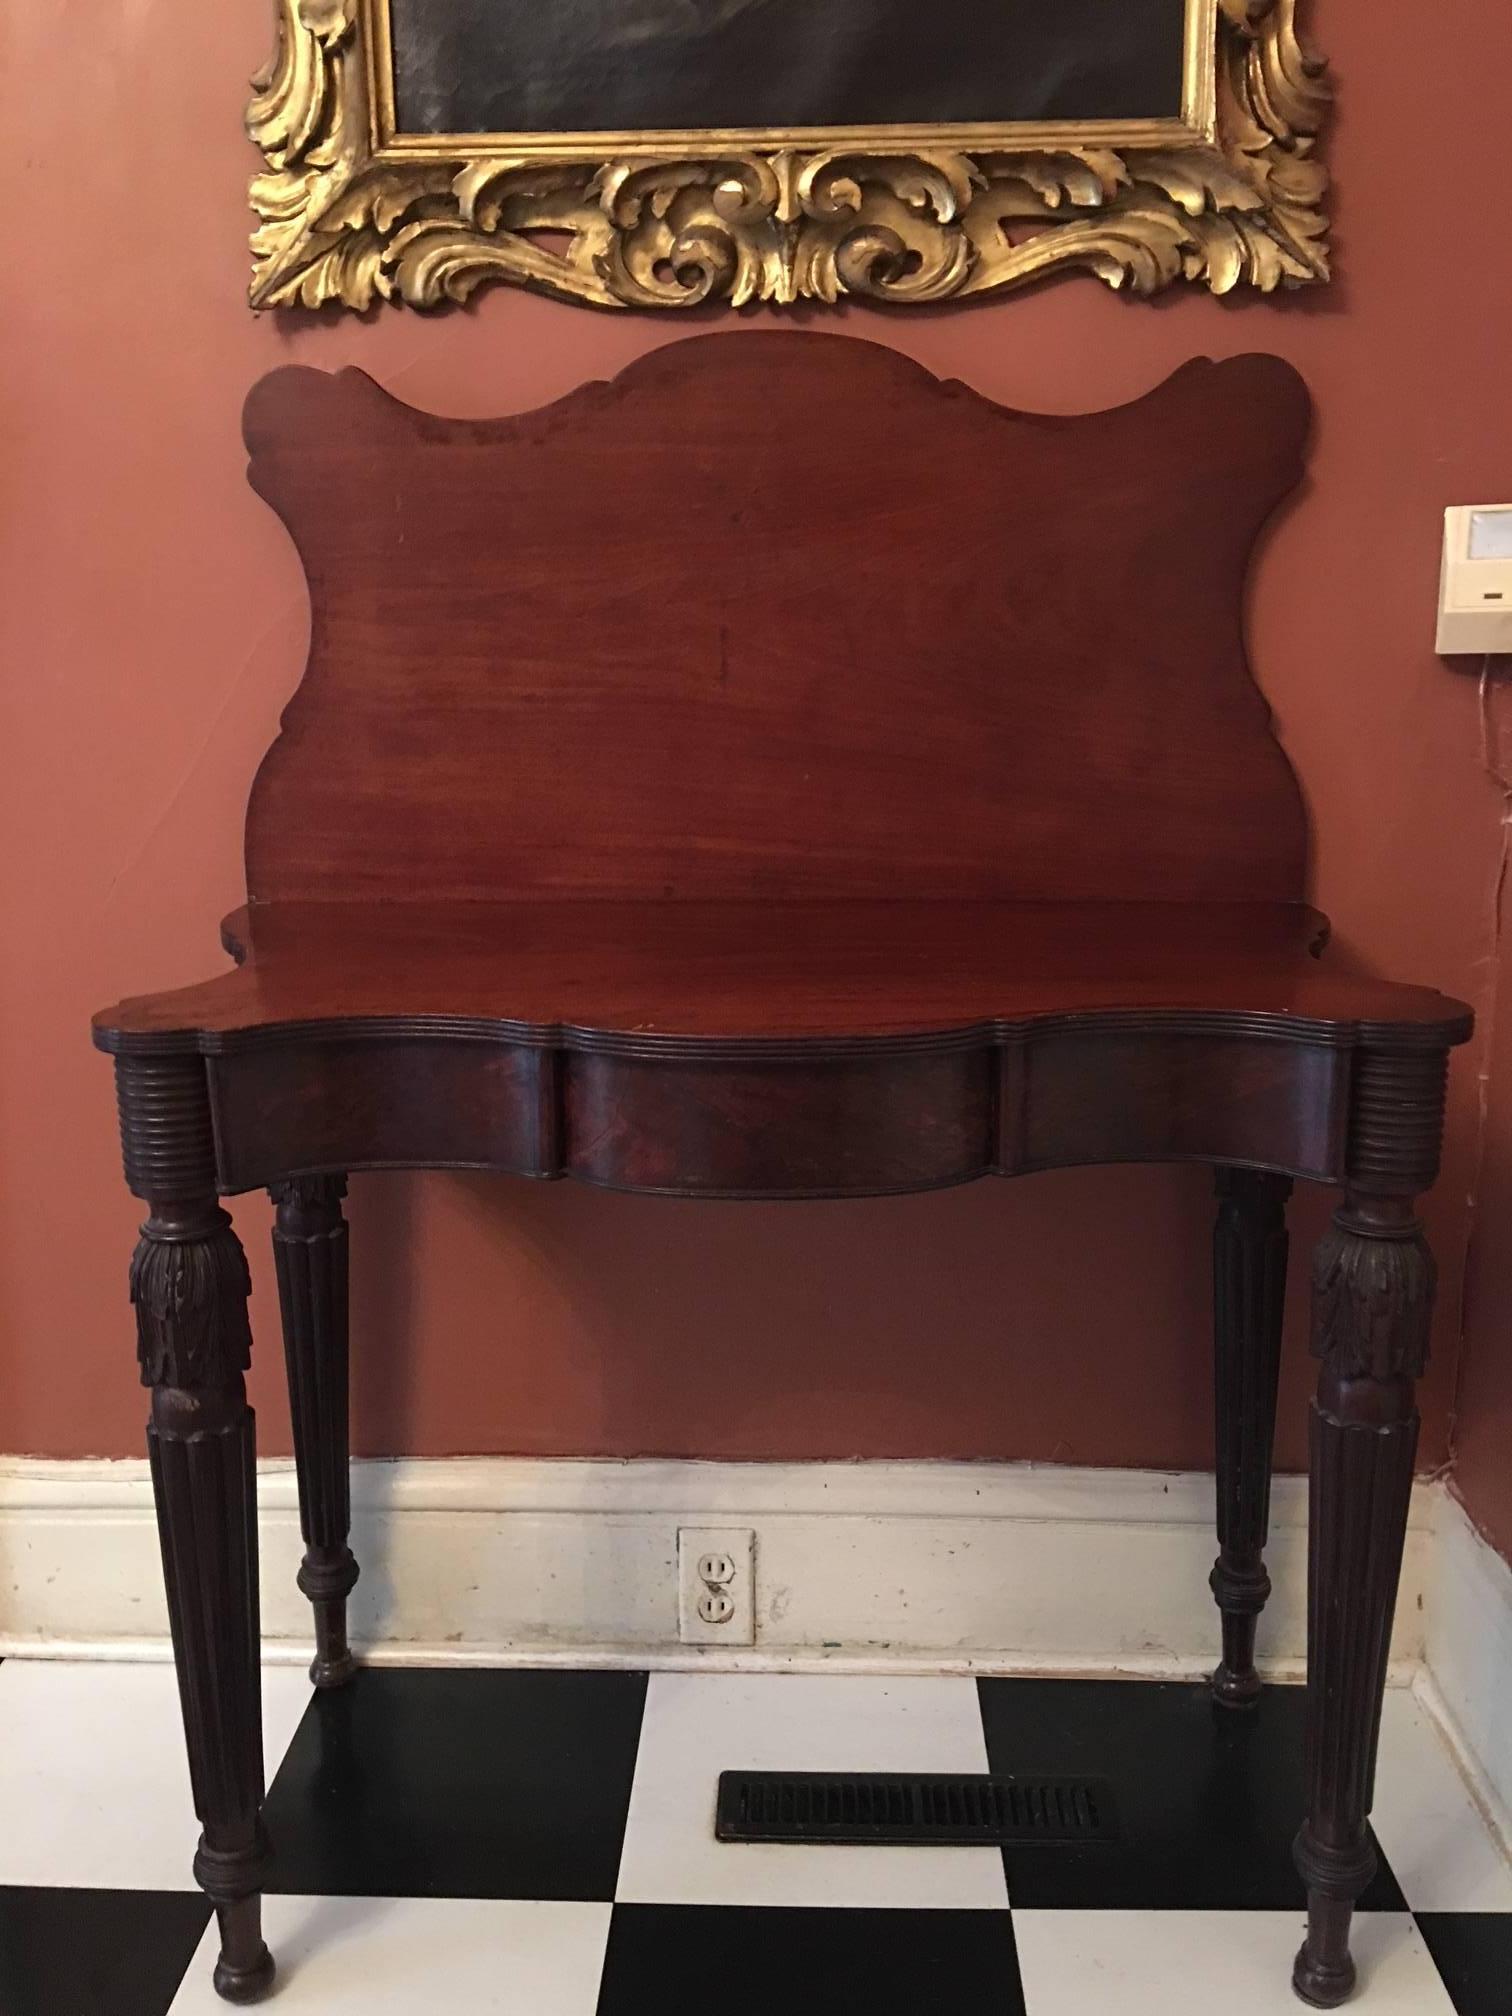 American games table with acanthus leaves decoration and tapered reeded legs, circa 1810. Massachusetts.